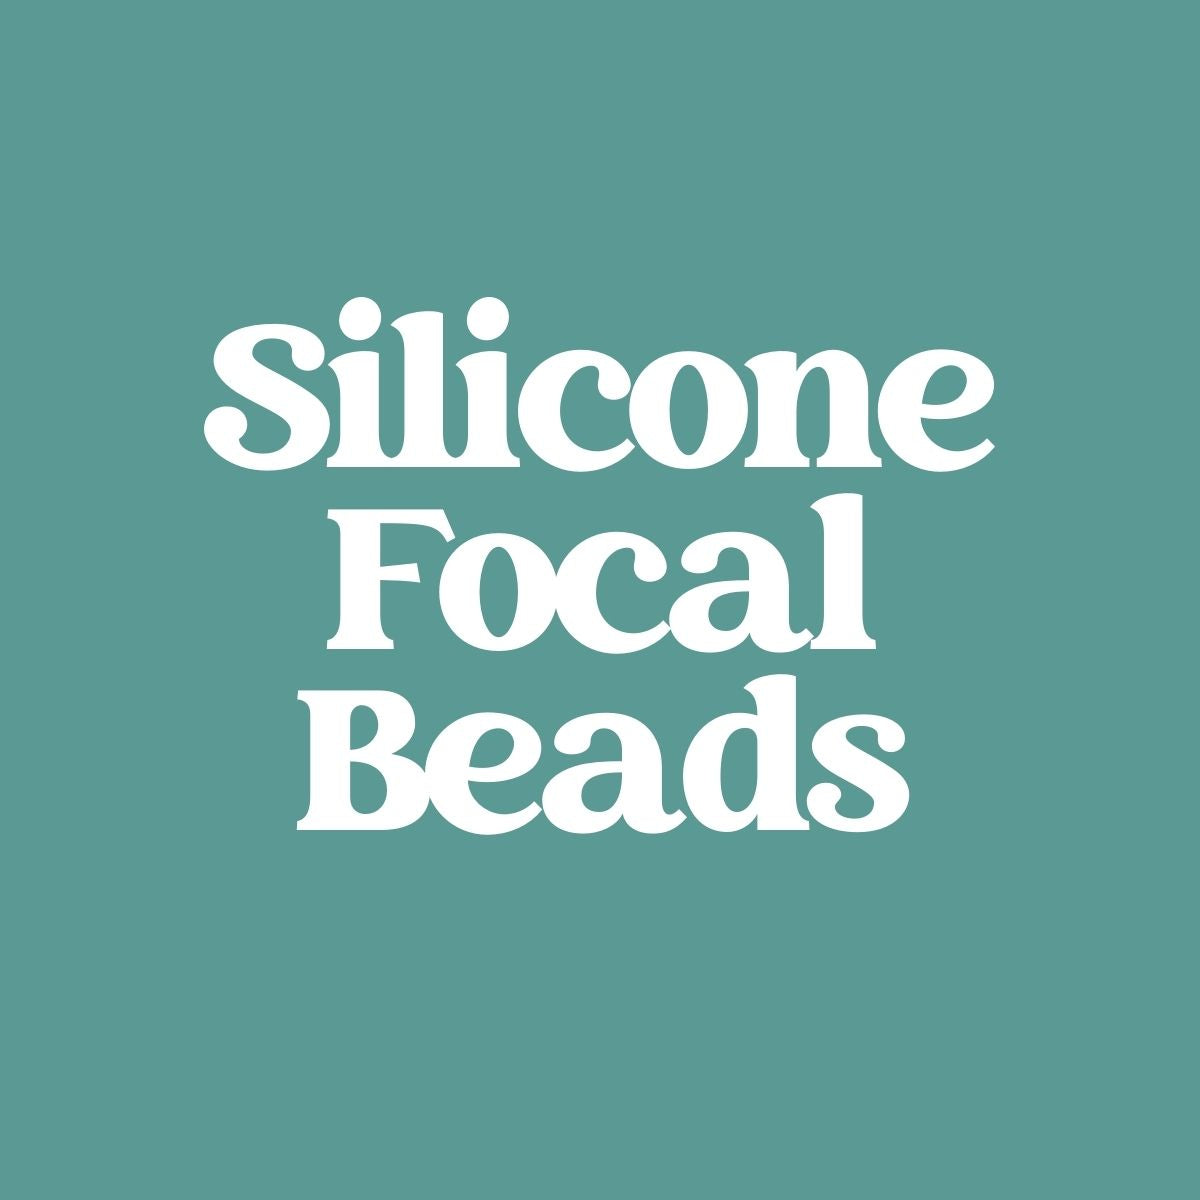 Silicone Focal Beads